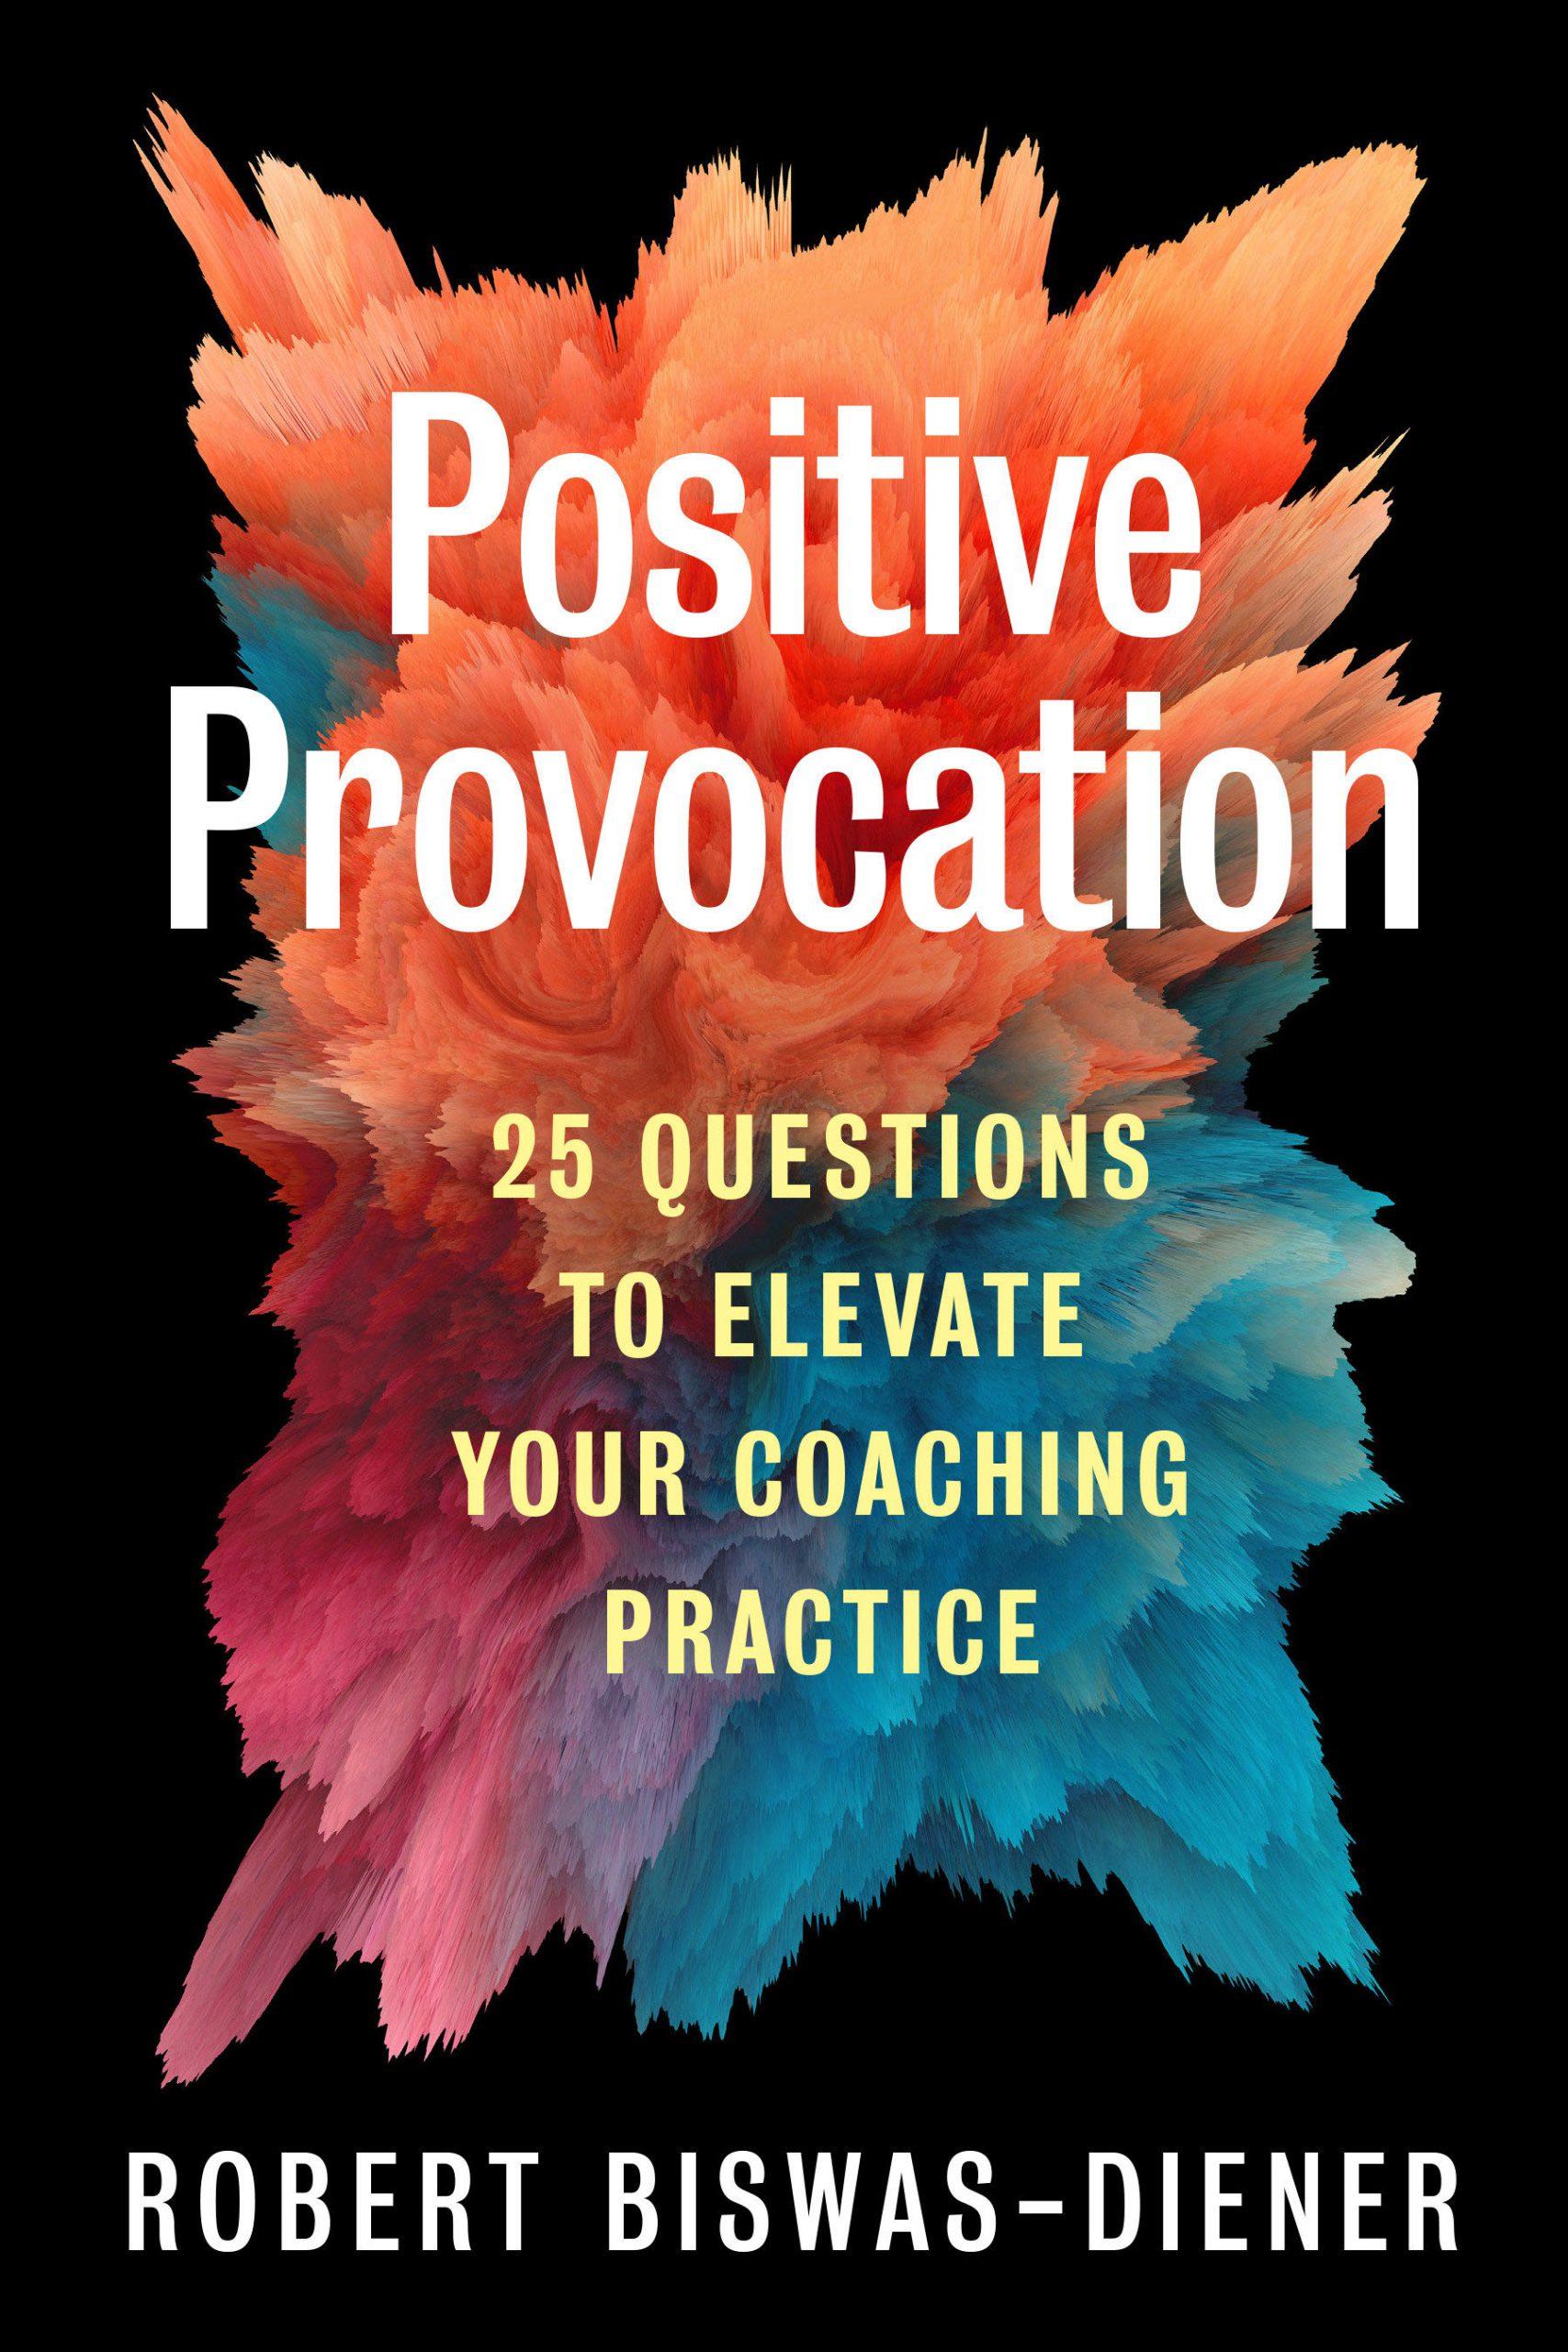 Positive Psychology Coaching Training With Dr. Robert Biswas-Diener